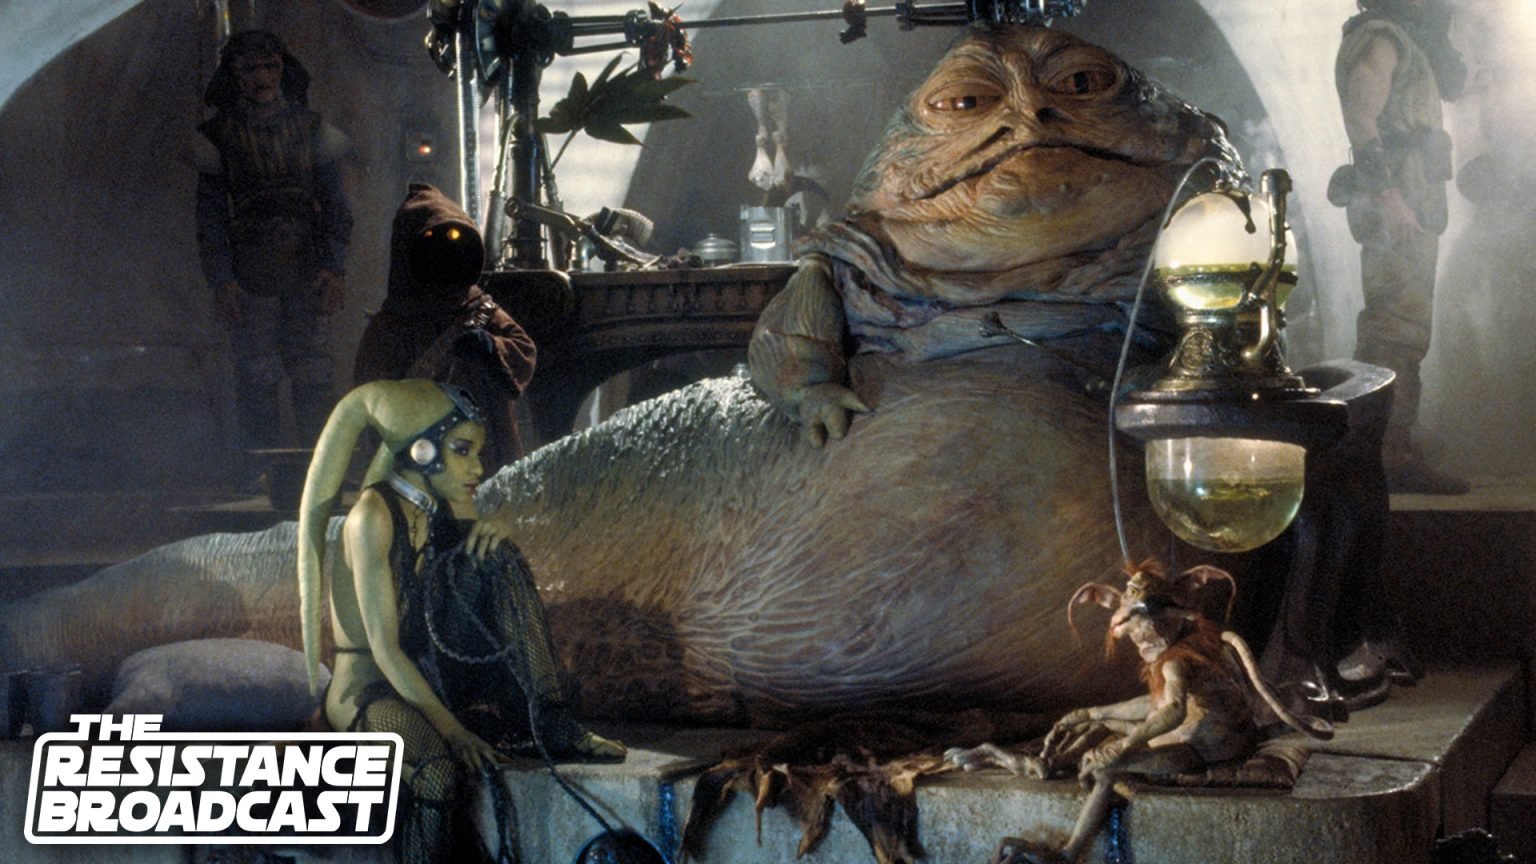 The Resistance Broadcast Look Back On Jabba’s Palace In Return Of The Jedi Star Wars News Net